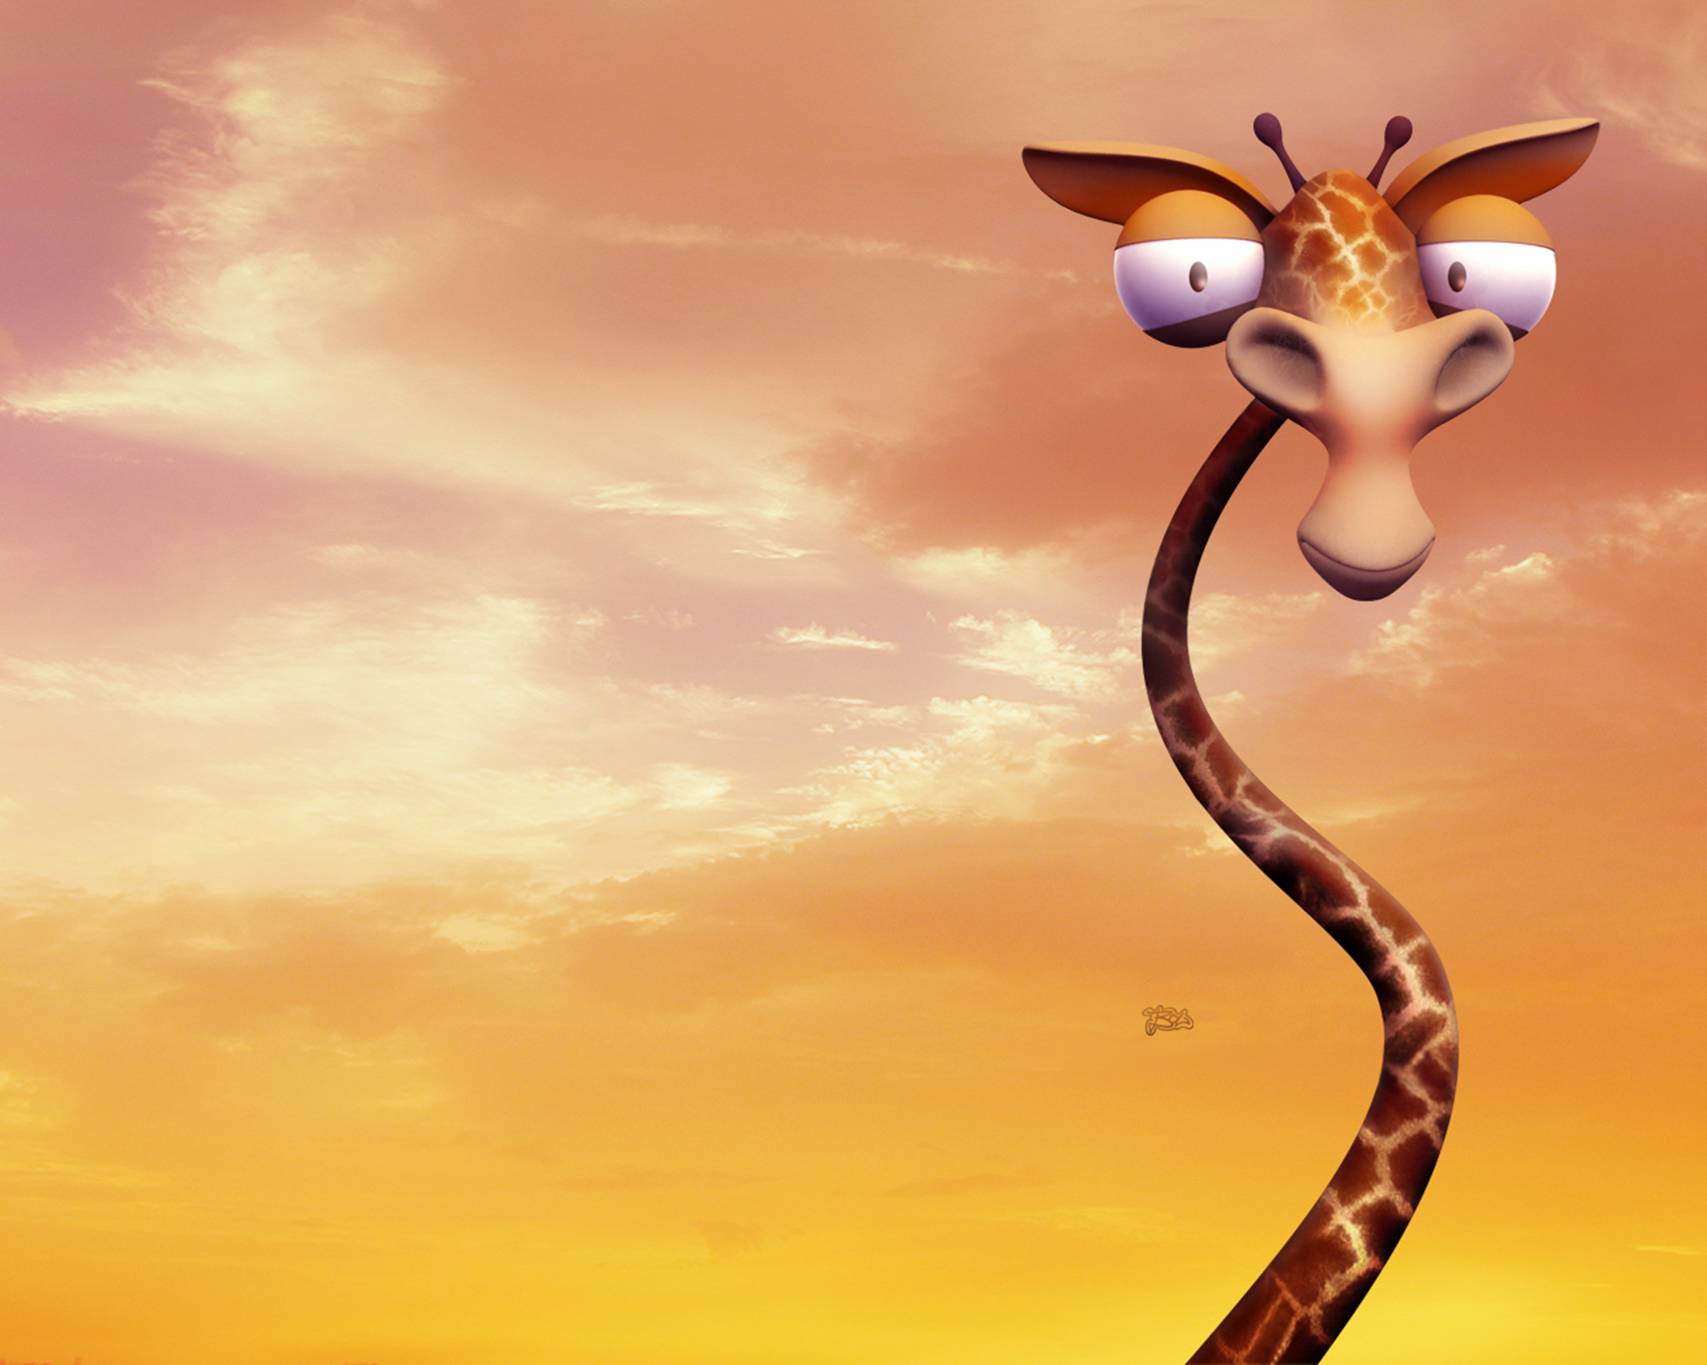 Funny Giraffe Cartoon Wallpaper For Free Download, HQ Background